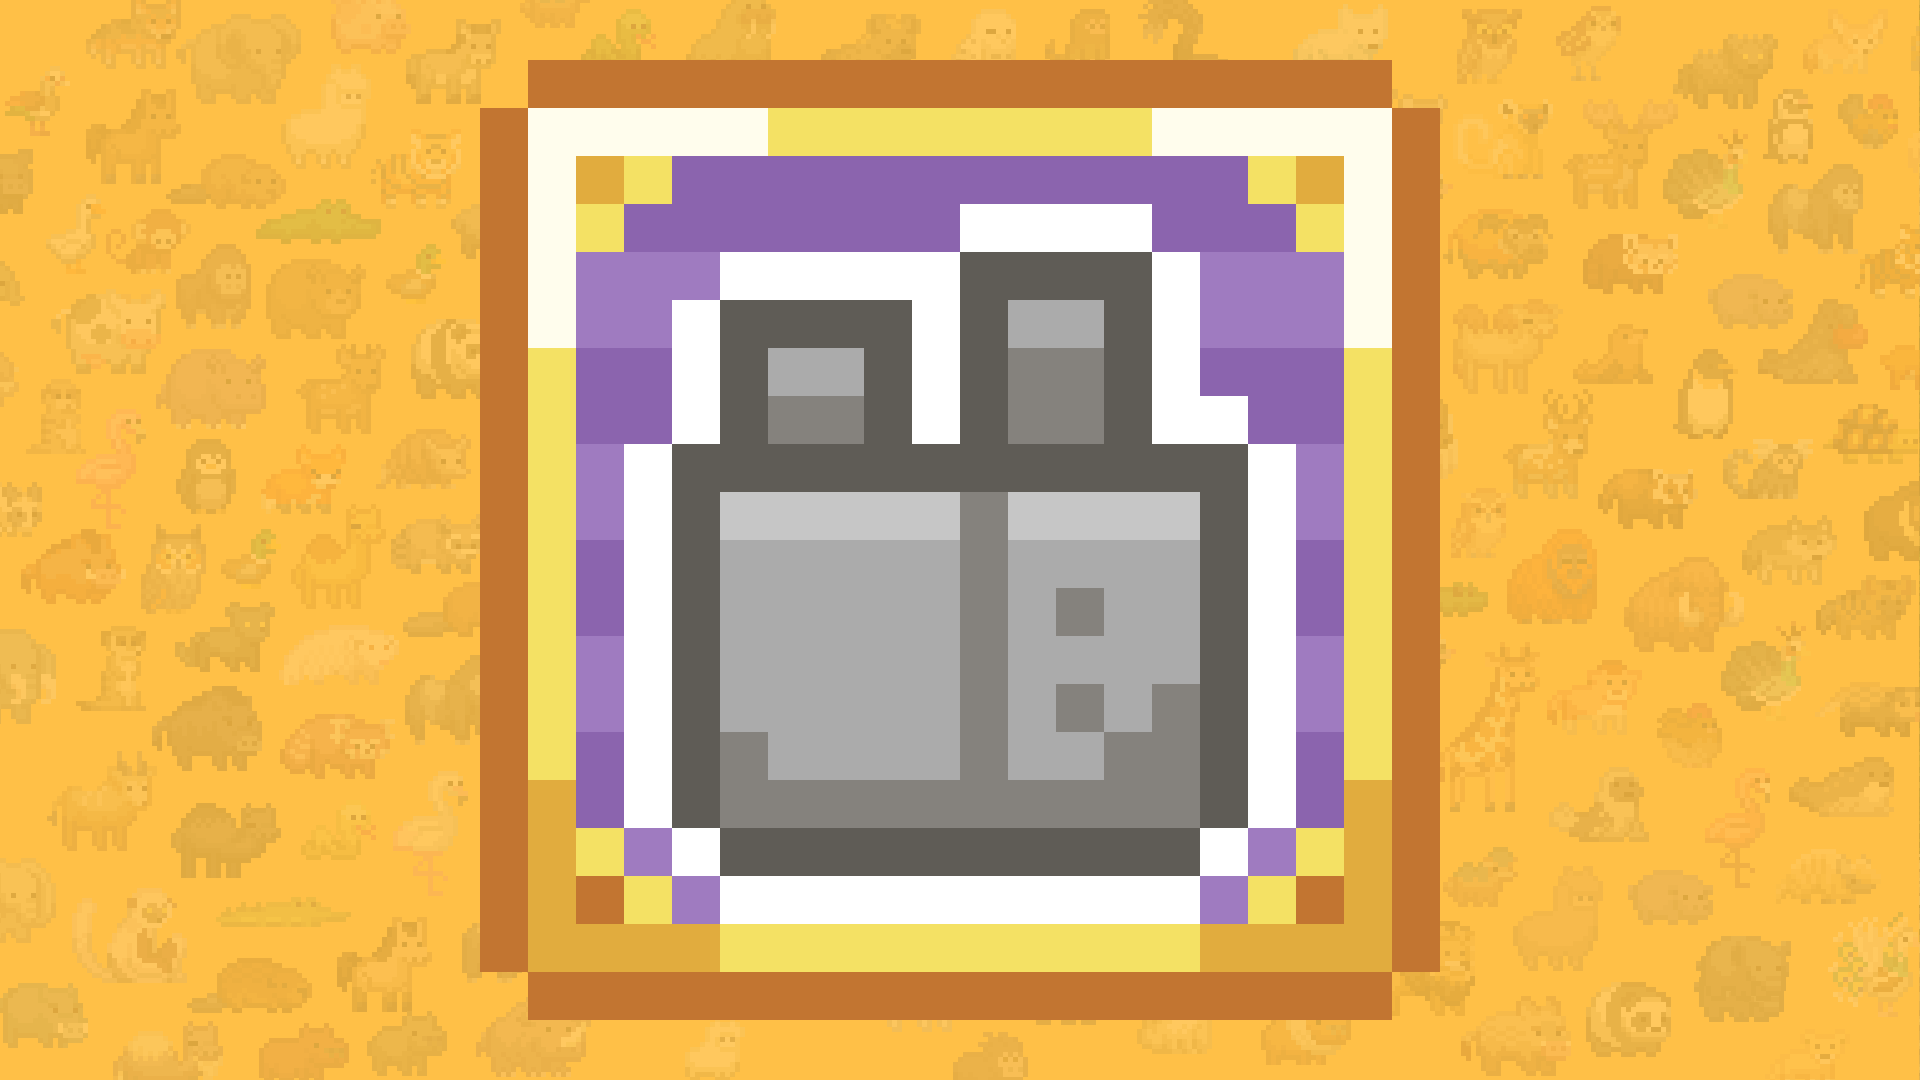 Icon for Factory Boss